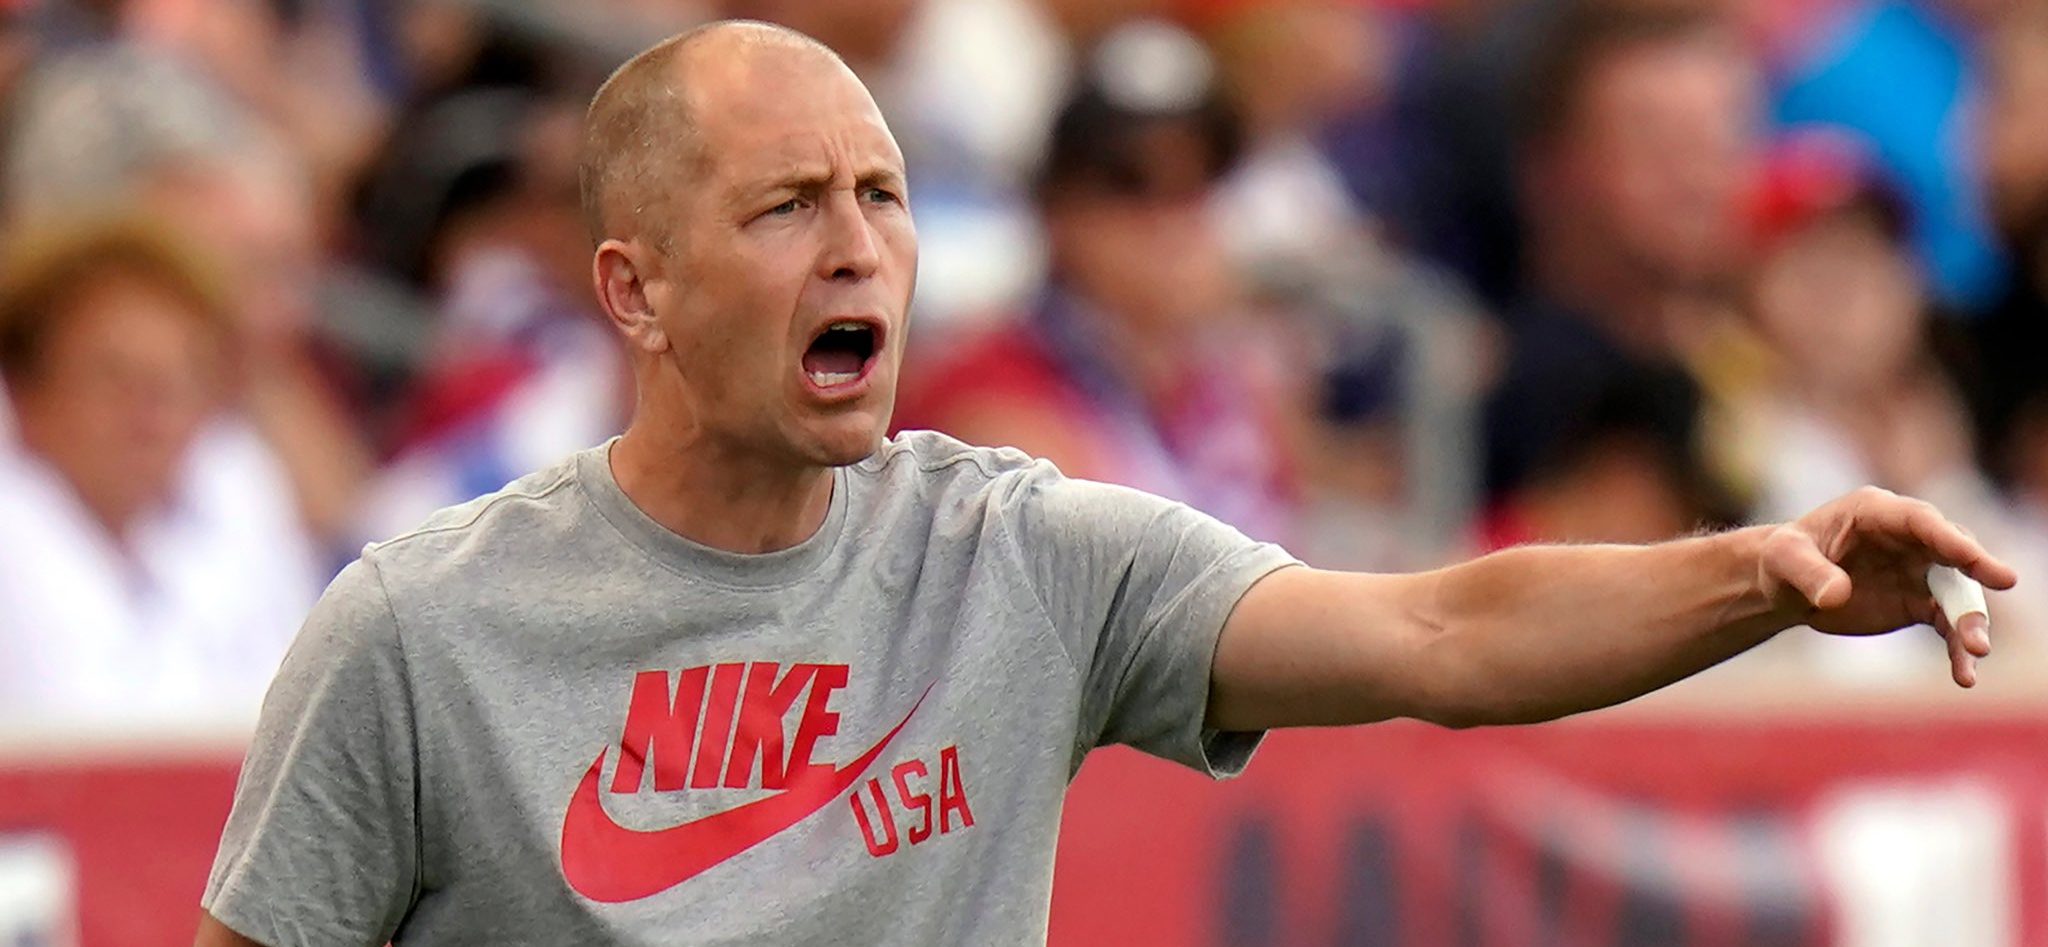 US coach admits team needs to improve for World Cup – Doha News